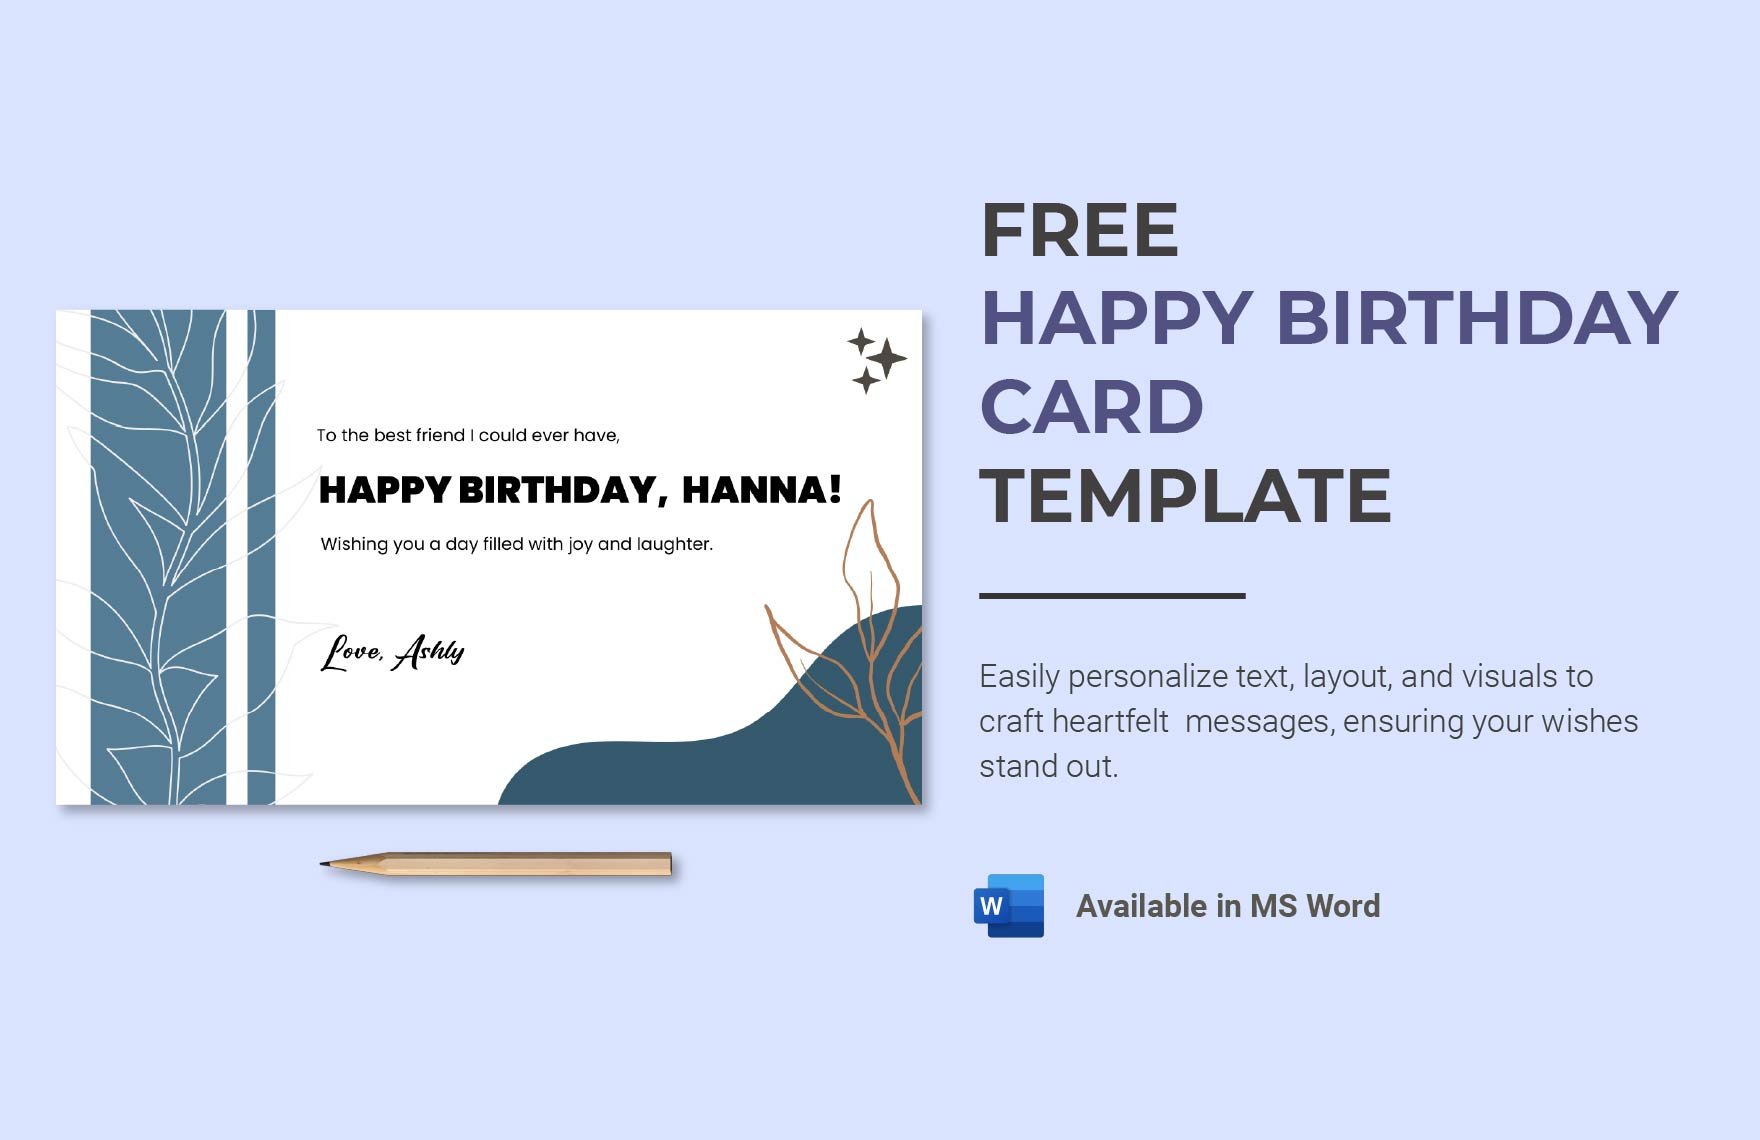 Free Happy Birthday Card Template in Word